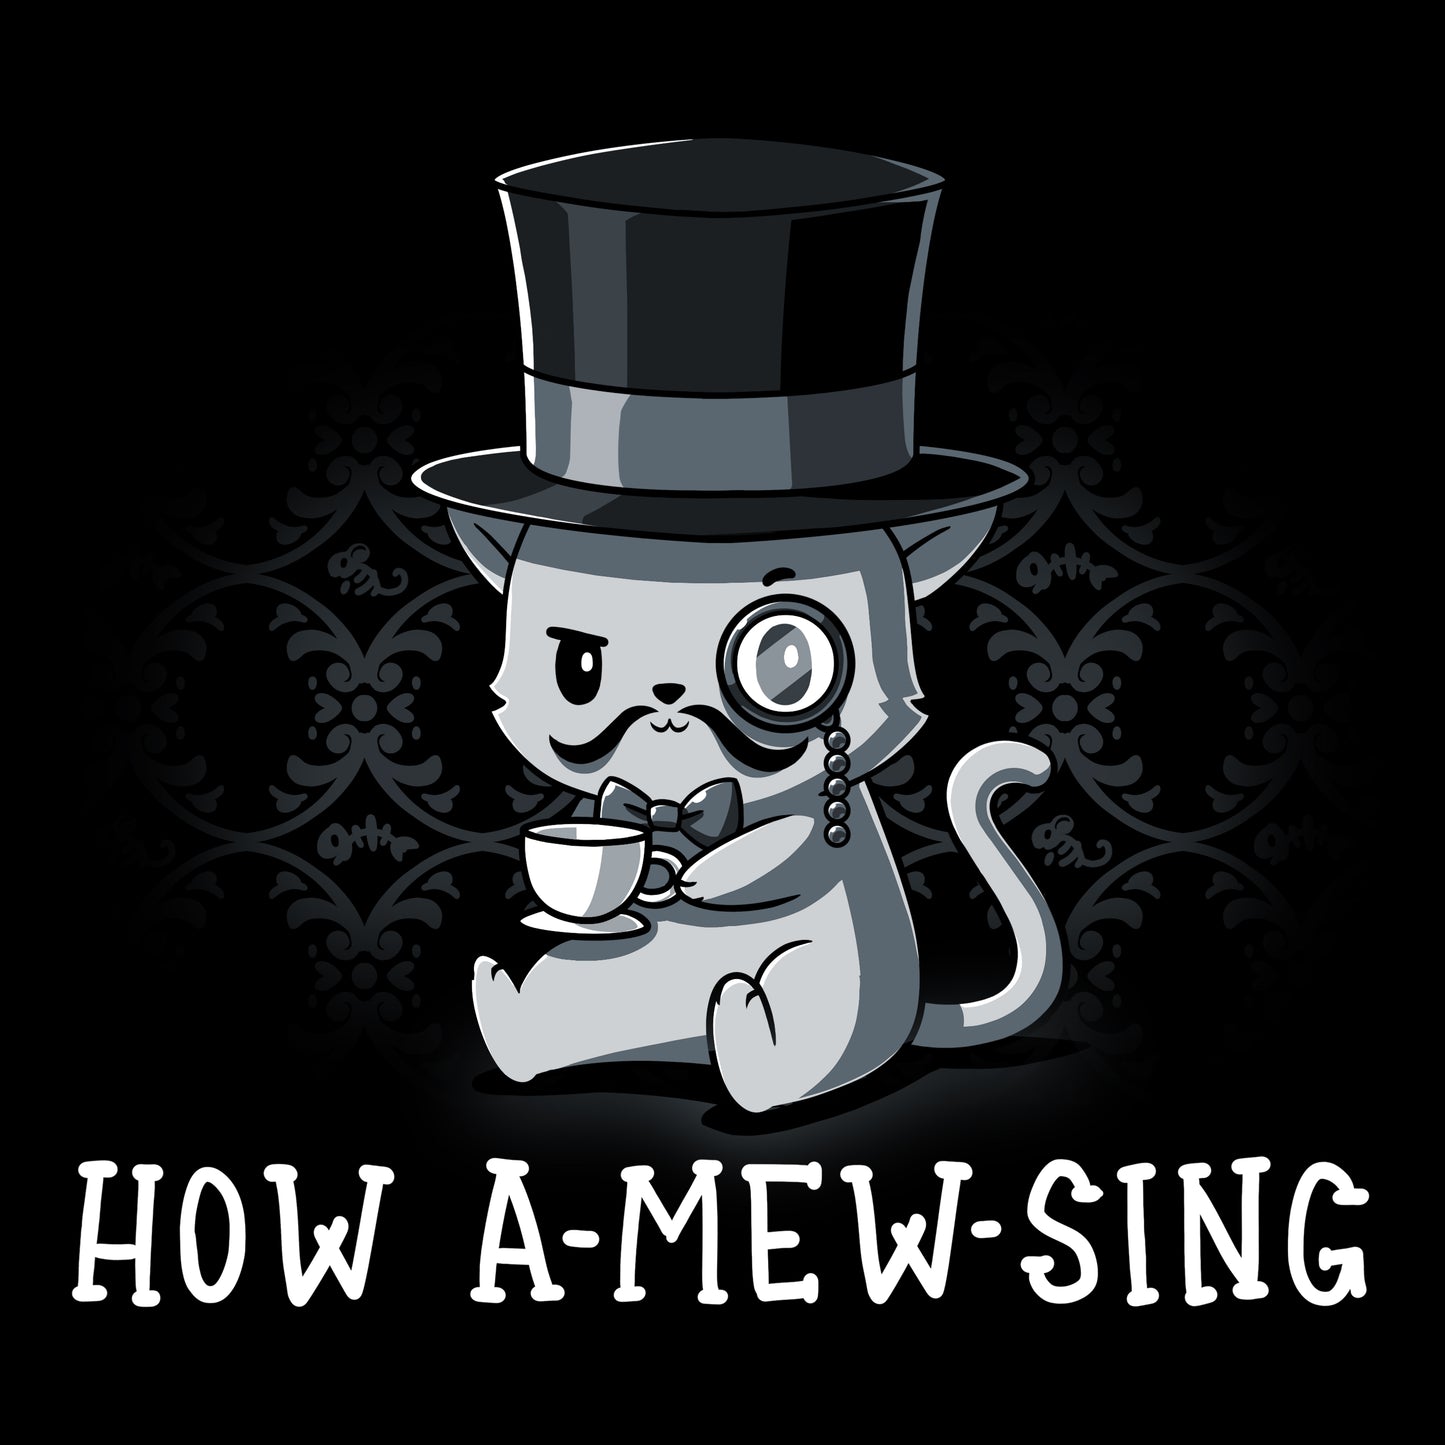 A TeeTurtle How A-mew-sing shirt featuring a cat in a top hat.